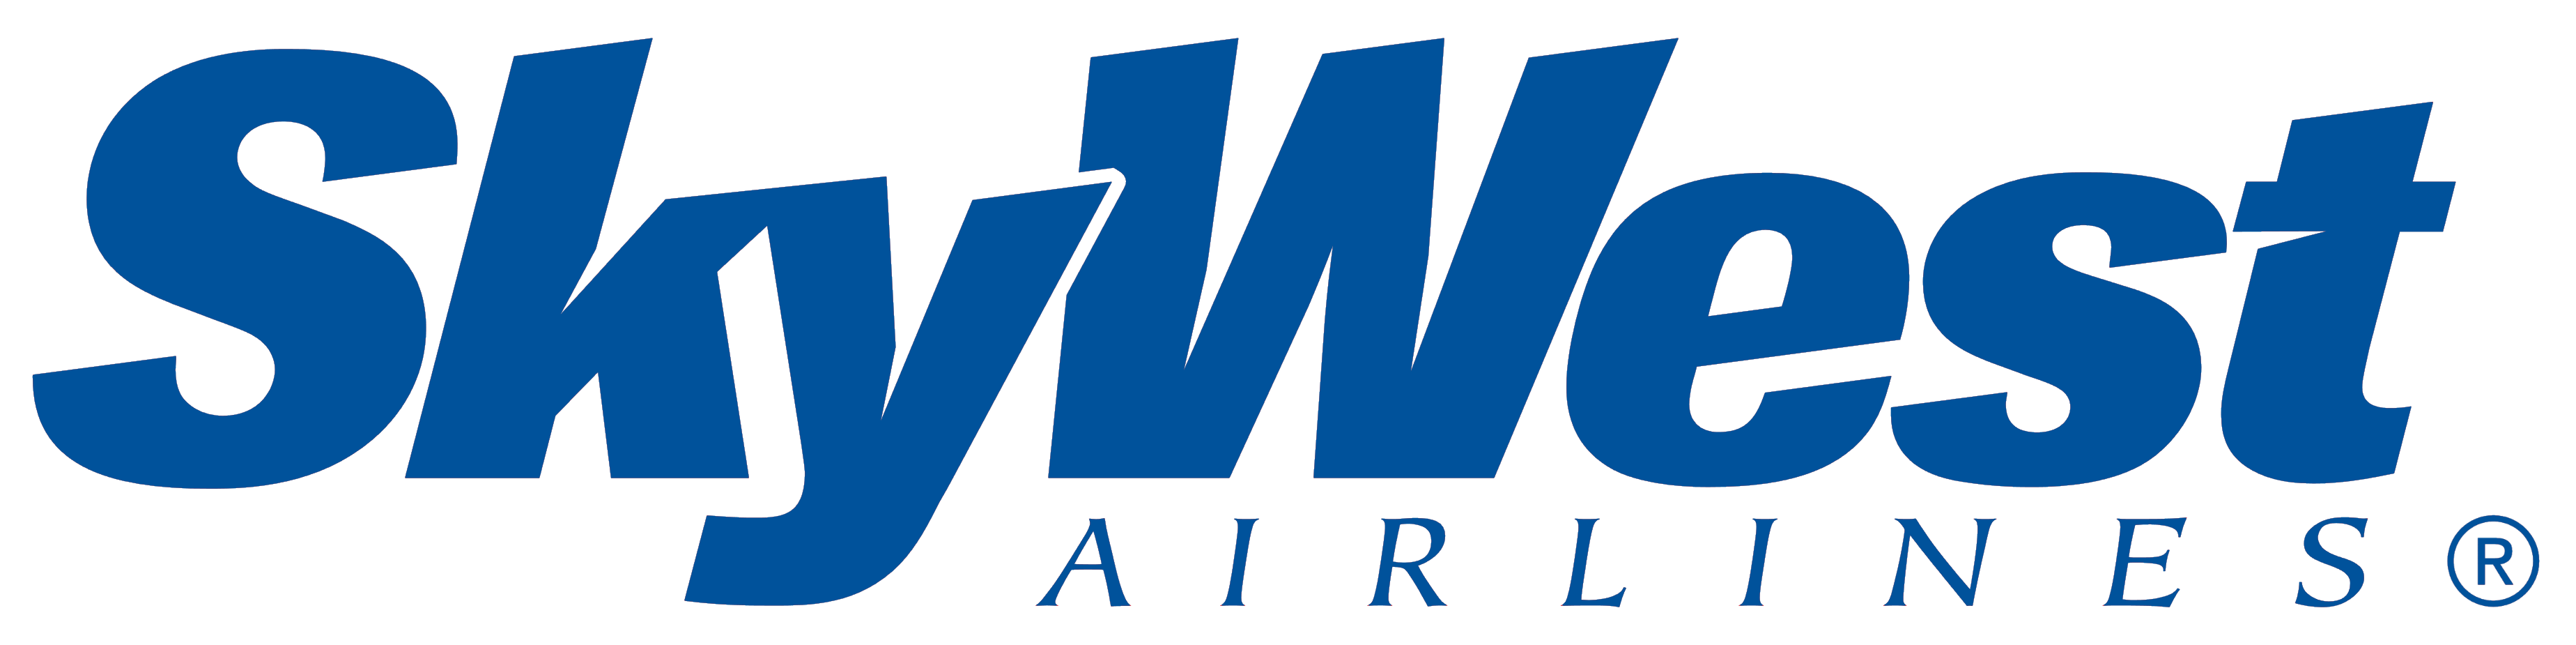 SkyWest Airlines logo, logotype